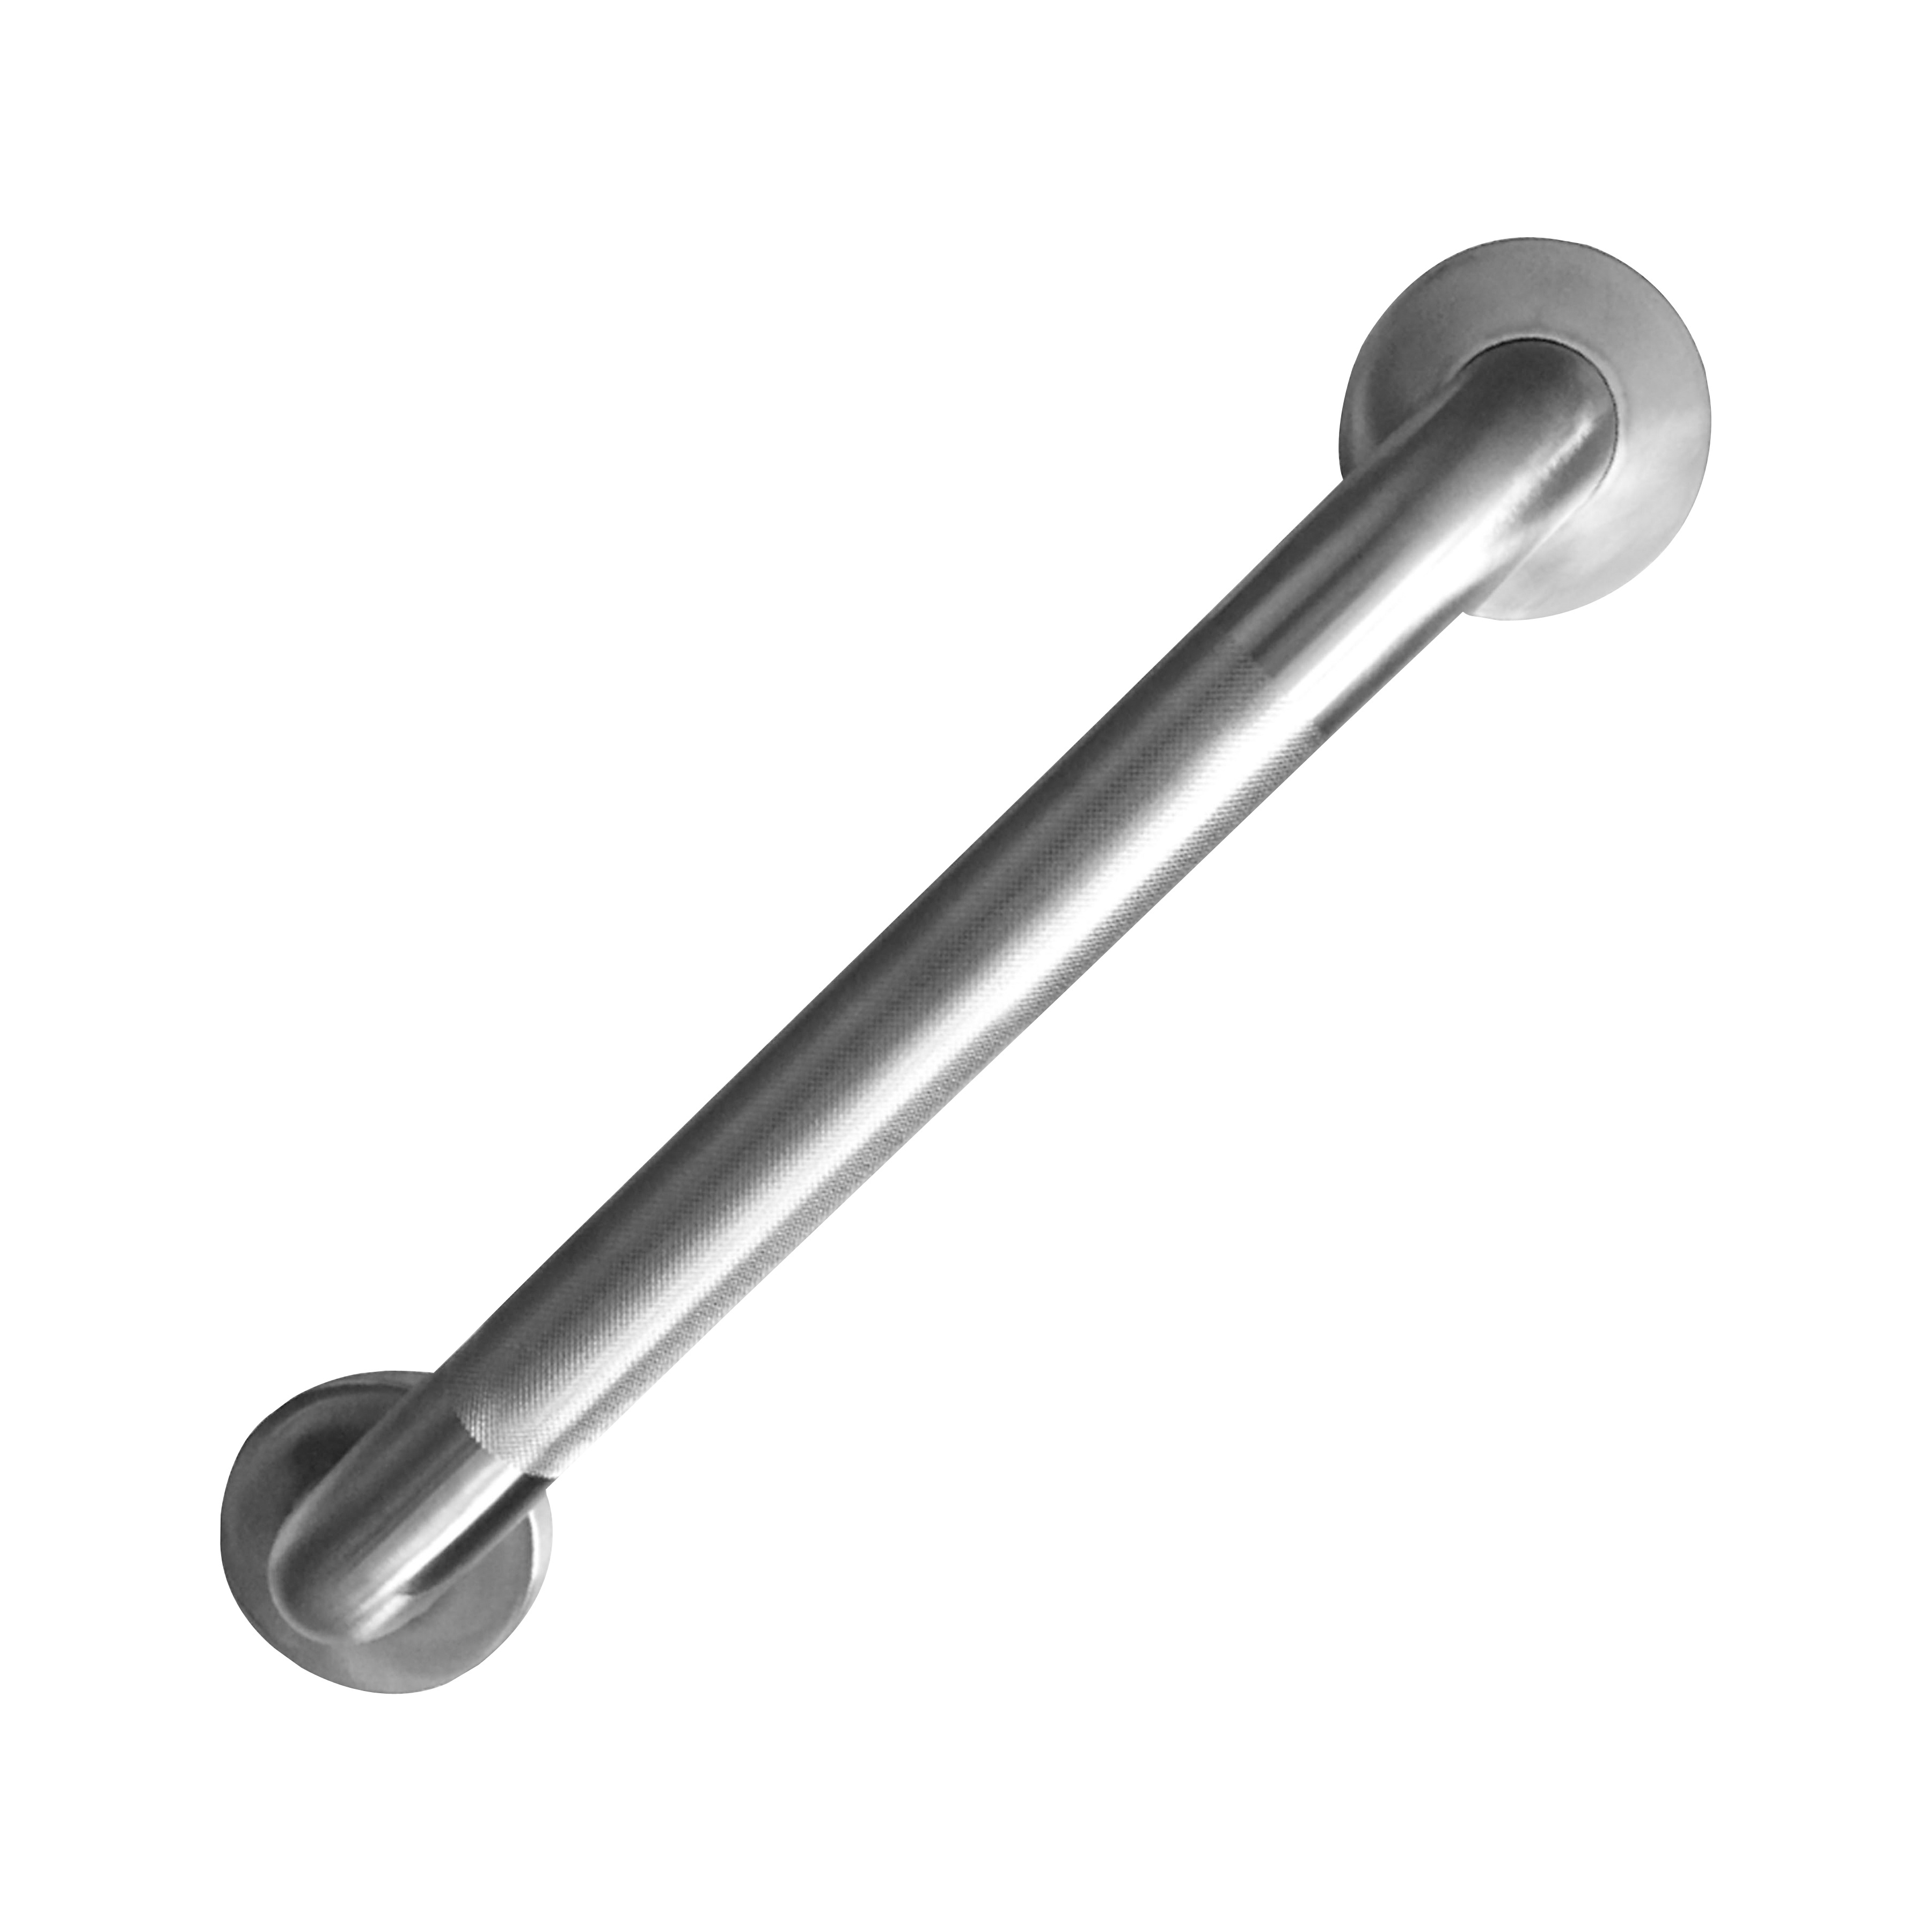 SG01-01&0418 Grab Bar, 18 in L Bar, Stainless Steel, Wall Mounted Mounting